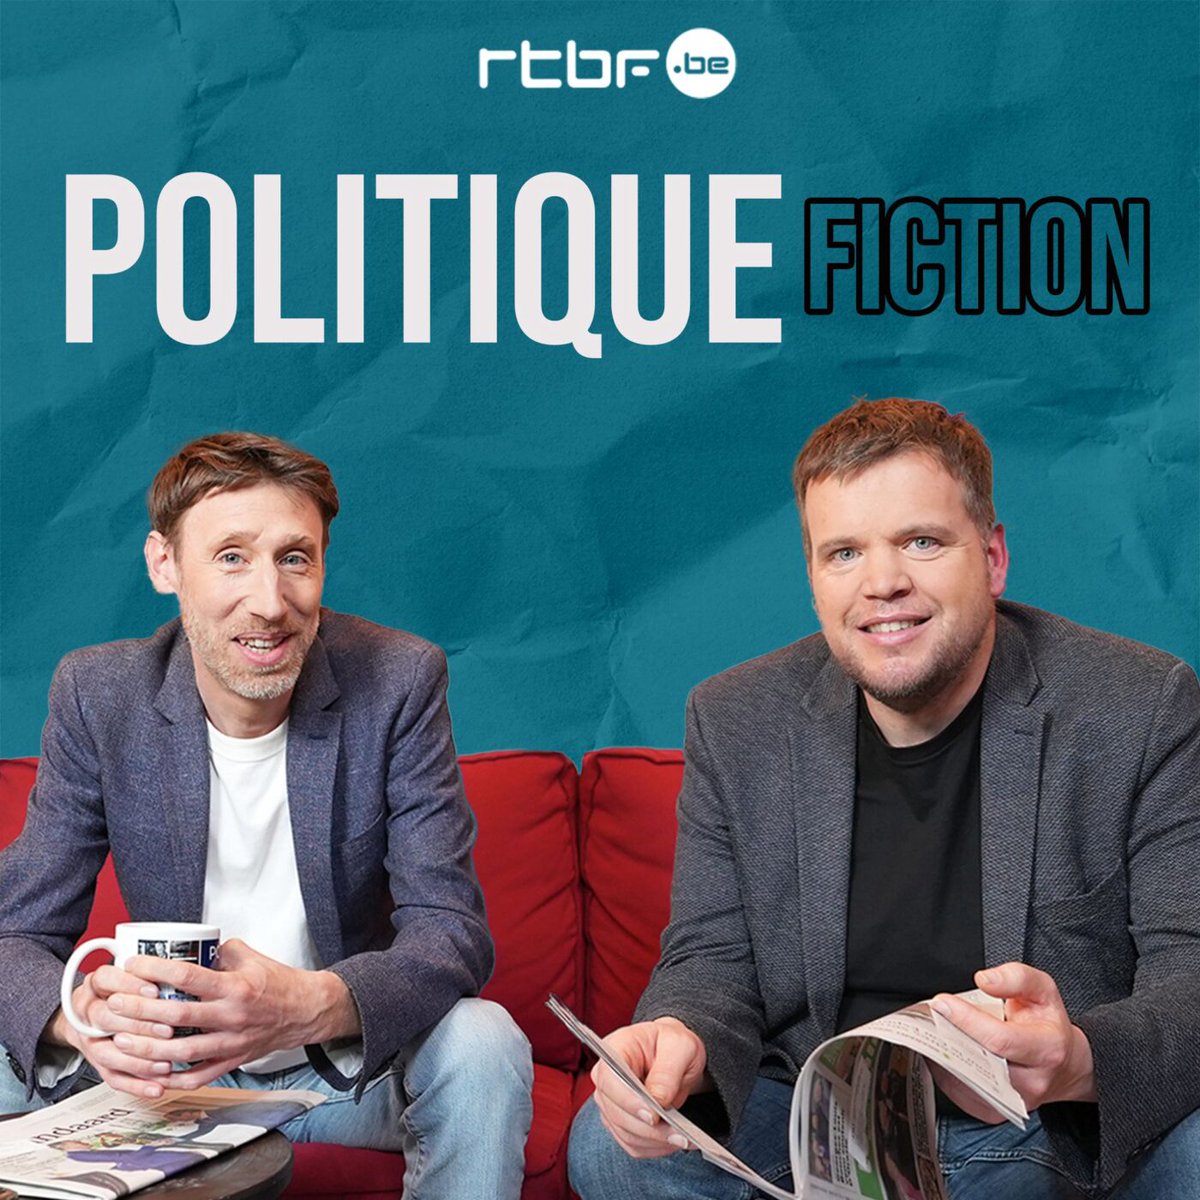 What if citizens rethought the way Belgium works, with our country's bi-centenary in 2030 on the horizon? In this fascinating episode of the @RTBF podcast 'Politique fiction', @BertrandHenne and @BaptisteHupin present an interesting train of thought. 🧵👇